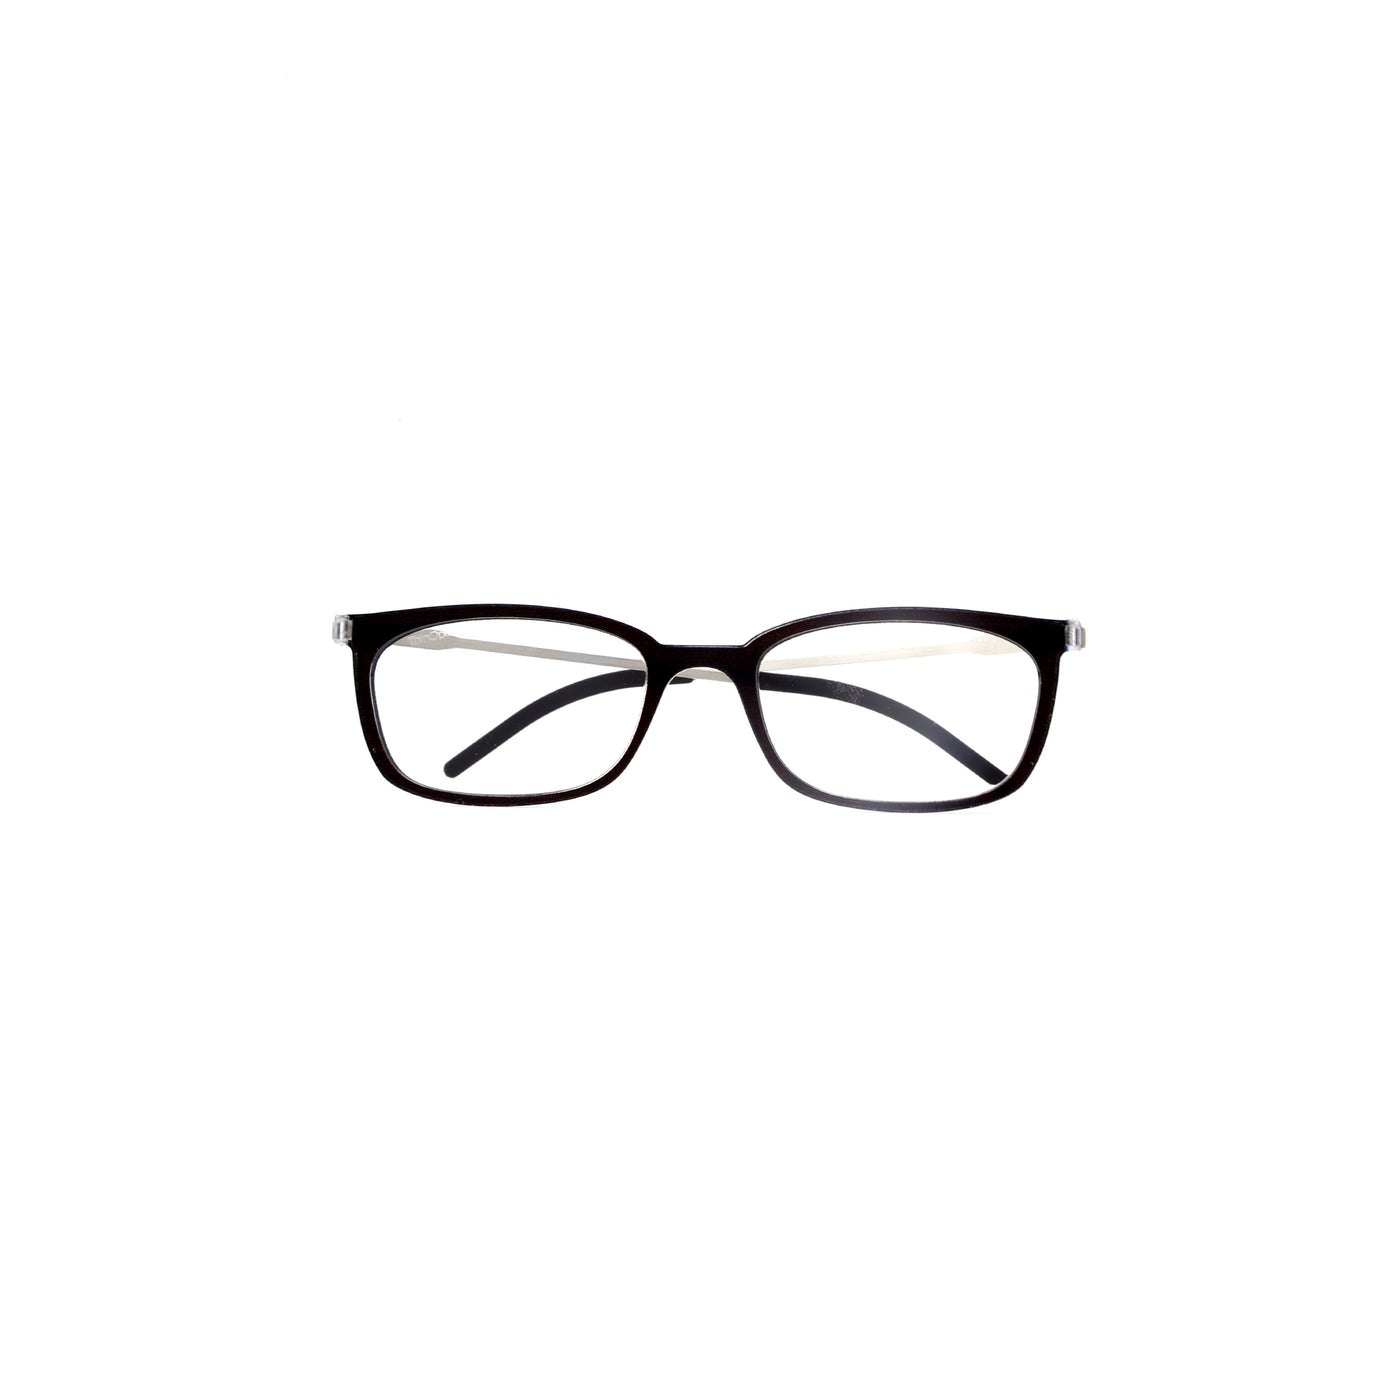 Thin Optics Connect for Men/Women | Reading Glasses - Vision Express Optical Philippines